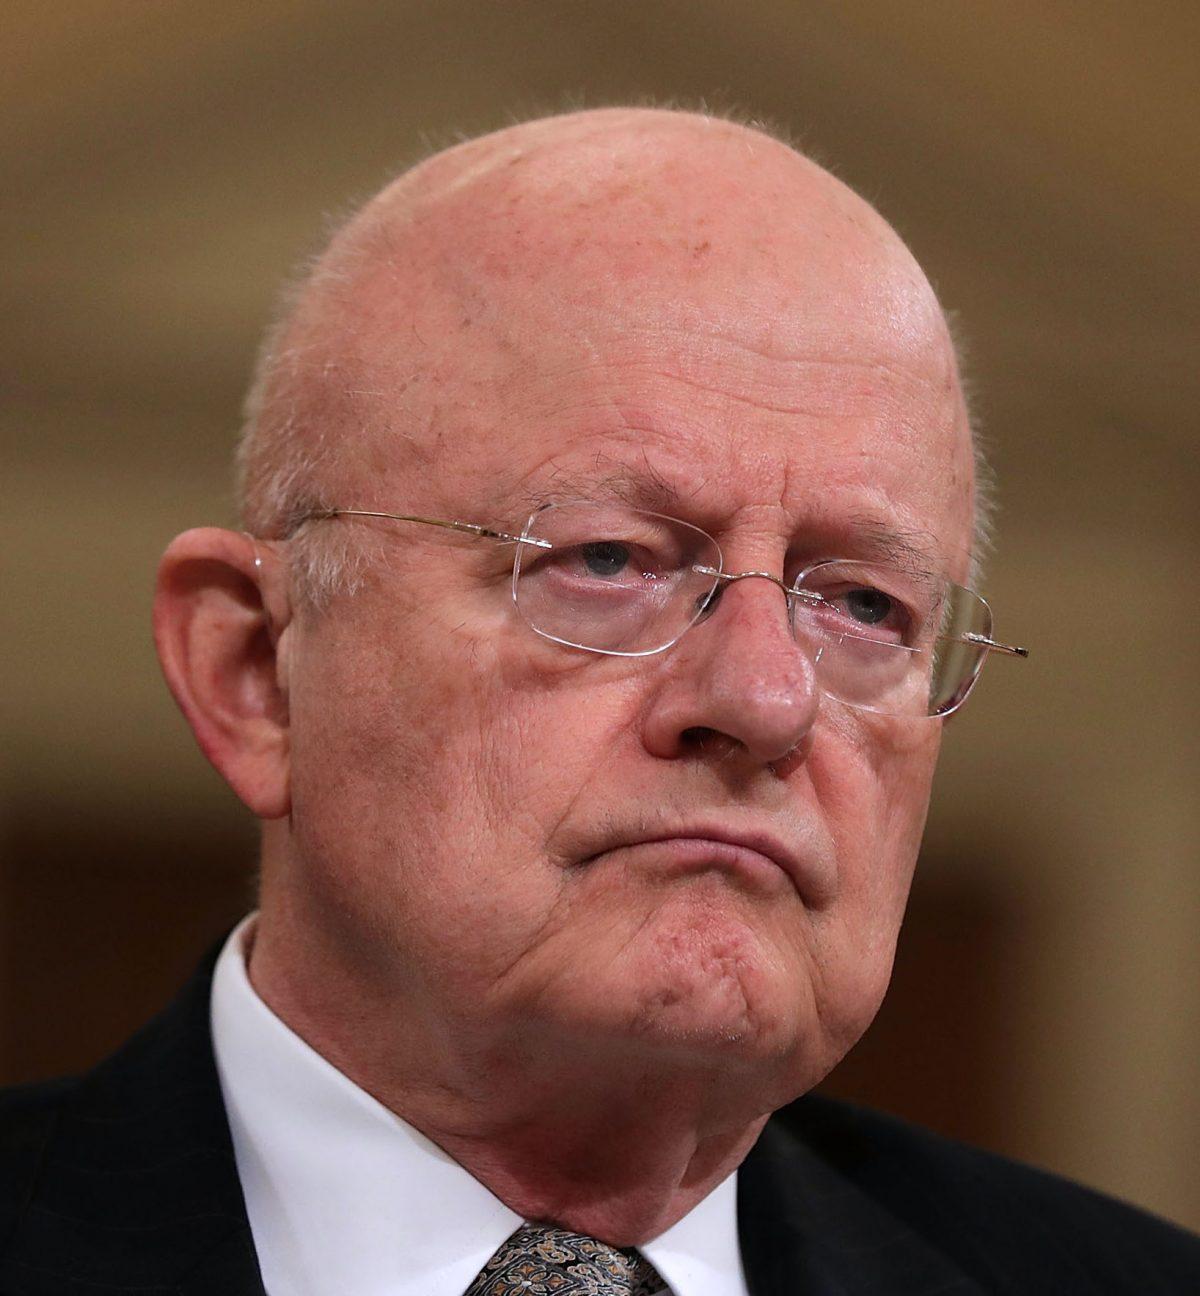 Former Director of National Intelligence James Clapper in a file photograph. (Alex Wong/Getty Images)